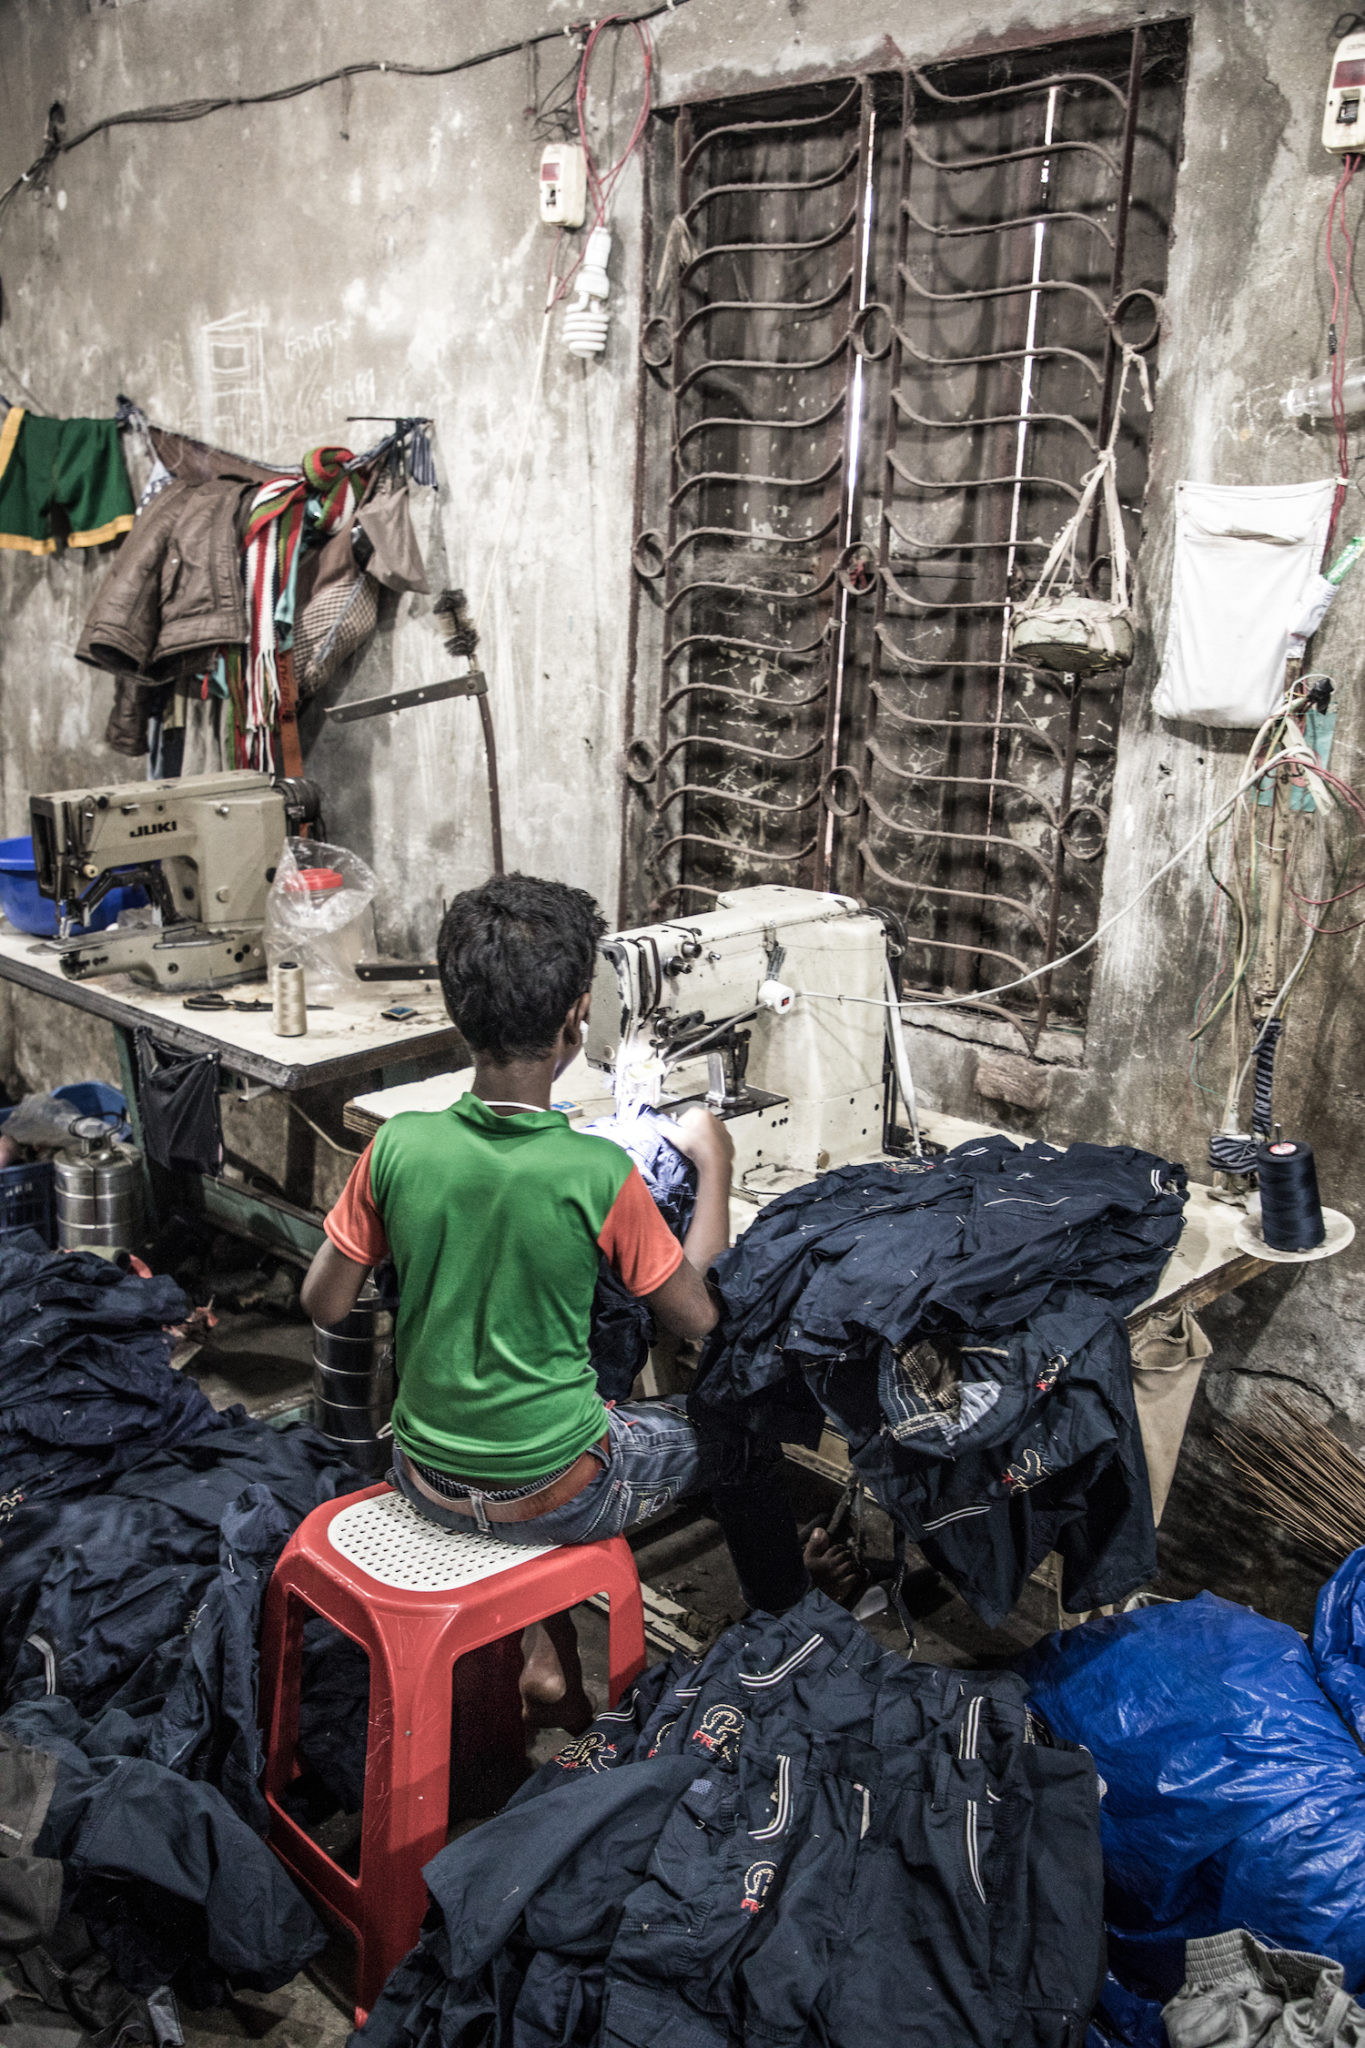 Child Labor In The Fashion Industry
 How We Can Tackle Child Labor and Modern Day Slavery in